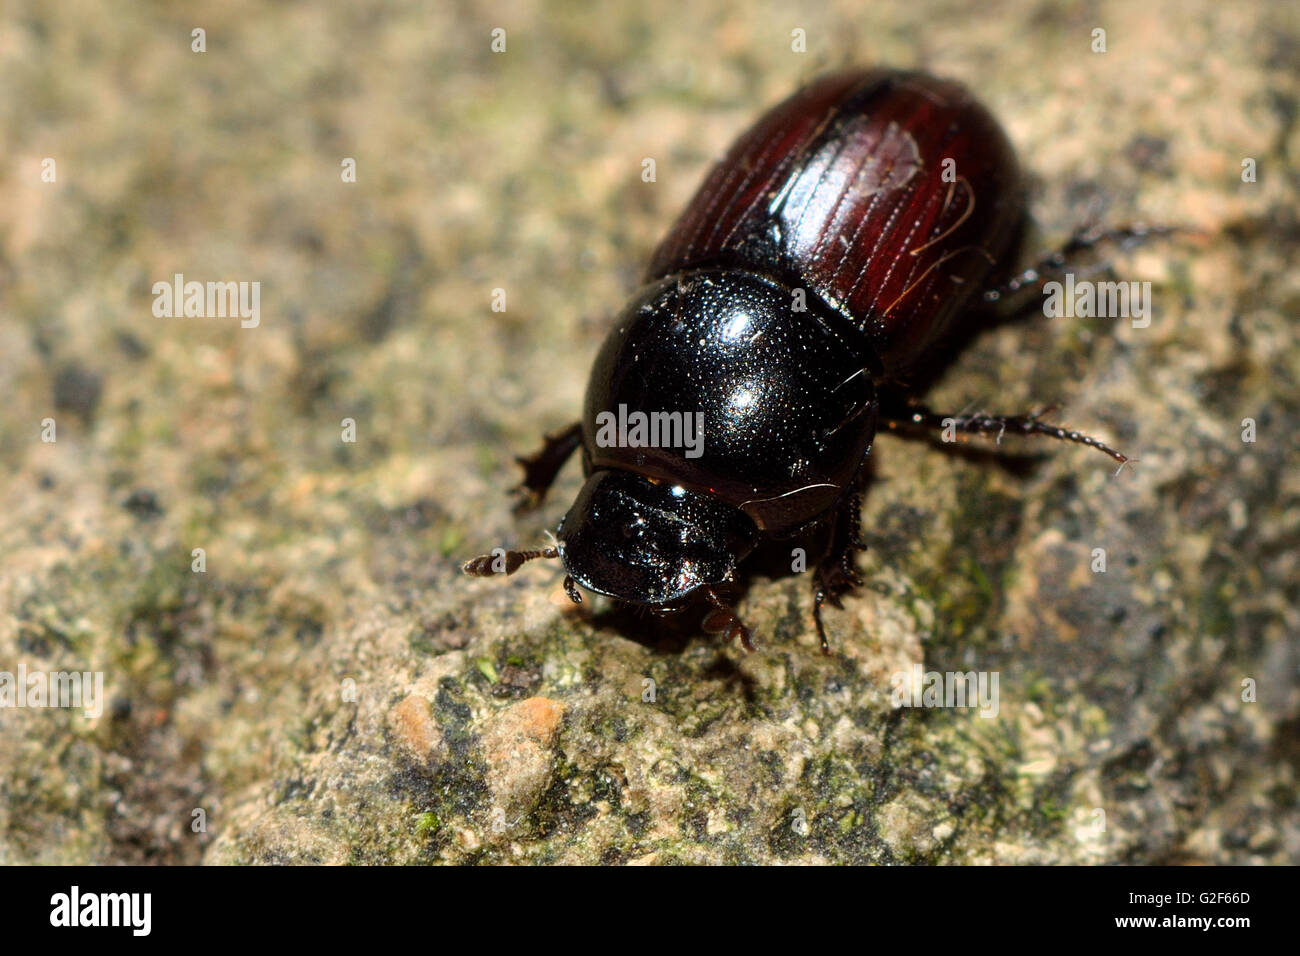 Aphodius depressus dung beetle. Insect in the family Scarabaeidae, commonly found in cow pats Stock Photo